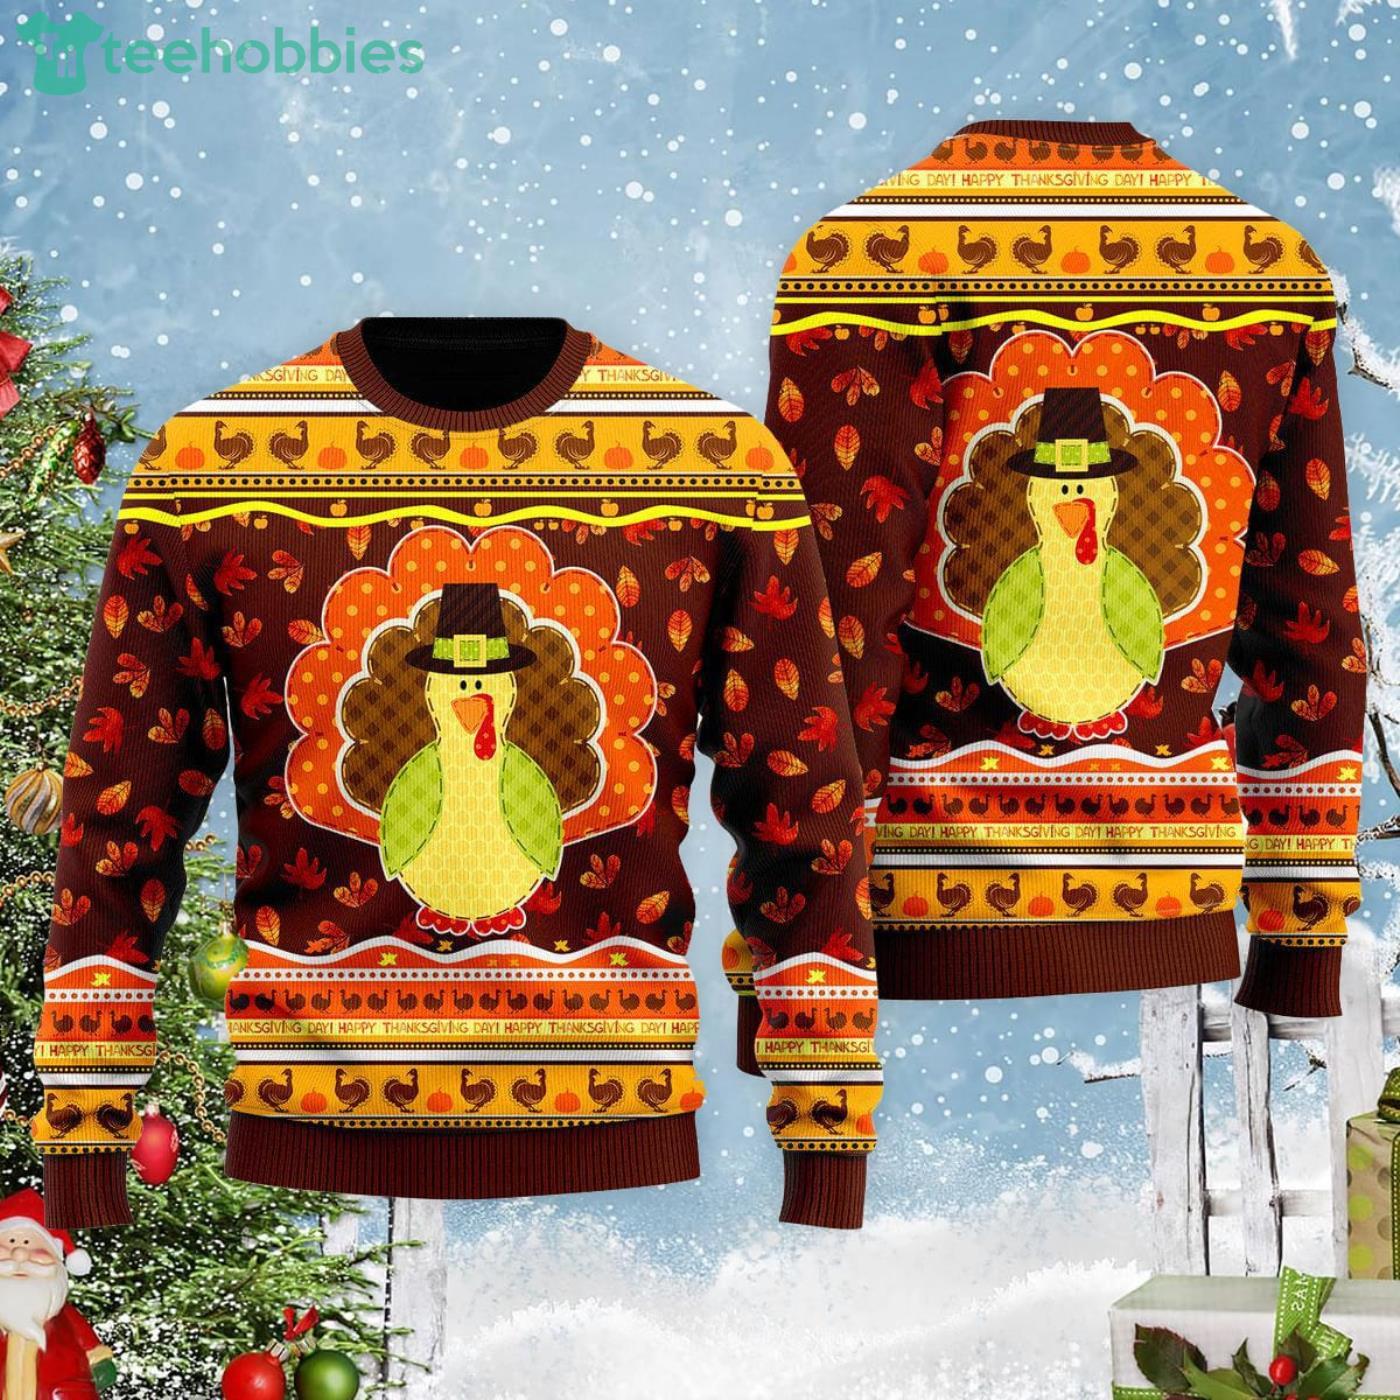 Turkey Amazing Gift Ugly Christmas 3D Sweater Christmas Gift For Men And  Women - Freedomdesign